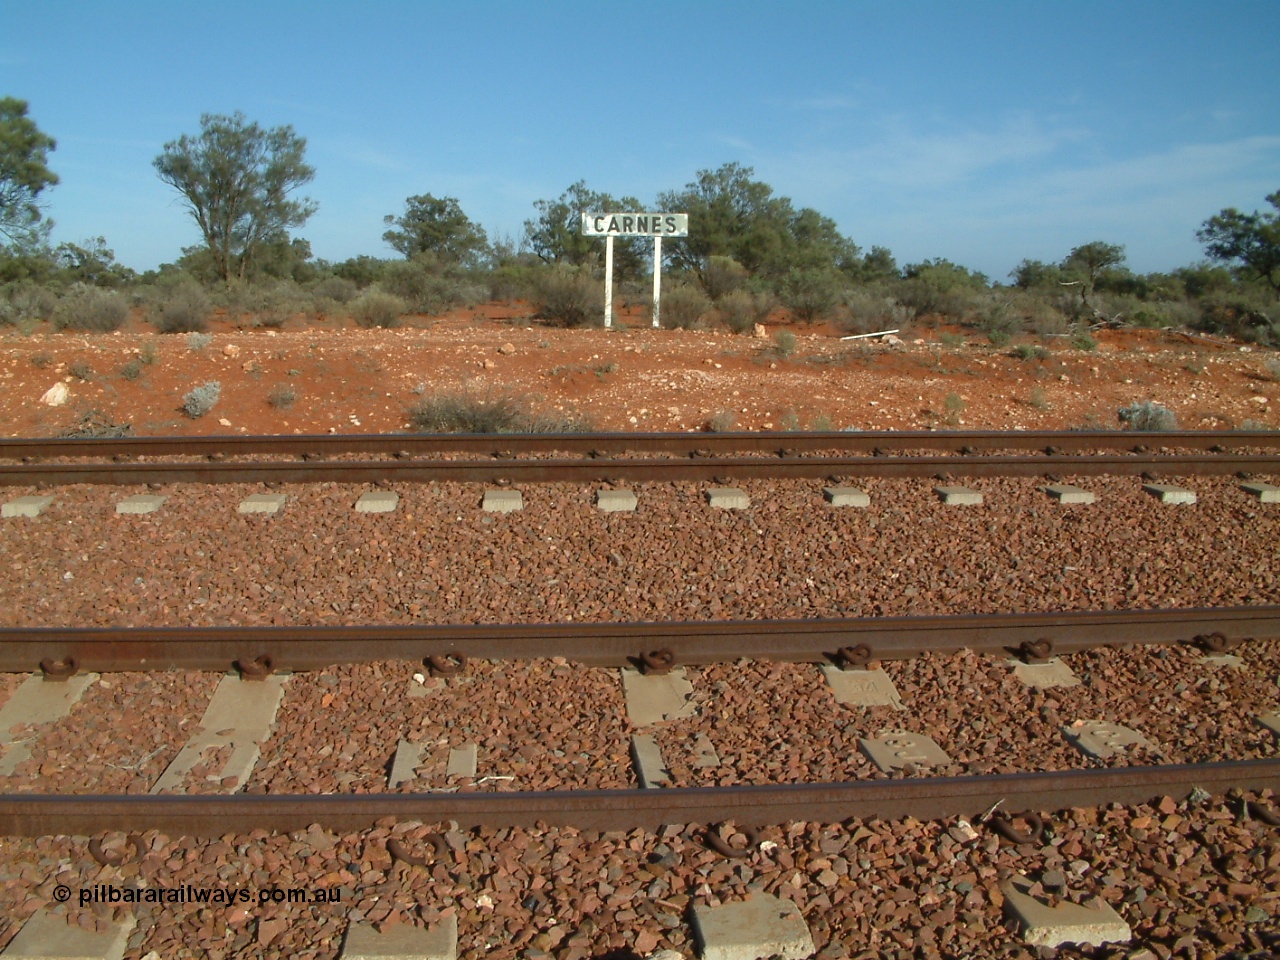 030416 084004
Carnes Siding located at the 566.4 km on the Central Australian line from Tarcoola to Alice Springs. Station nameboard. [url=https://goo.gl/maps/4PBoUfKbtJfCwKLA9]GeoData location[/url]. 16th April 2003.
